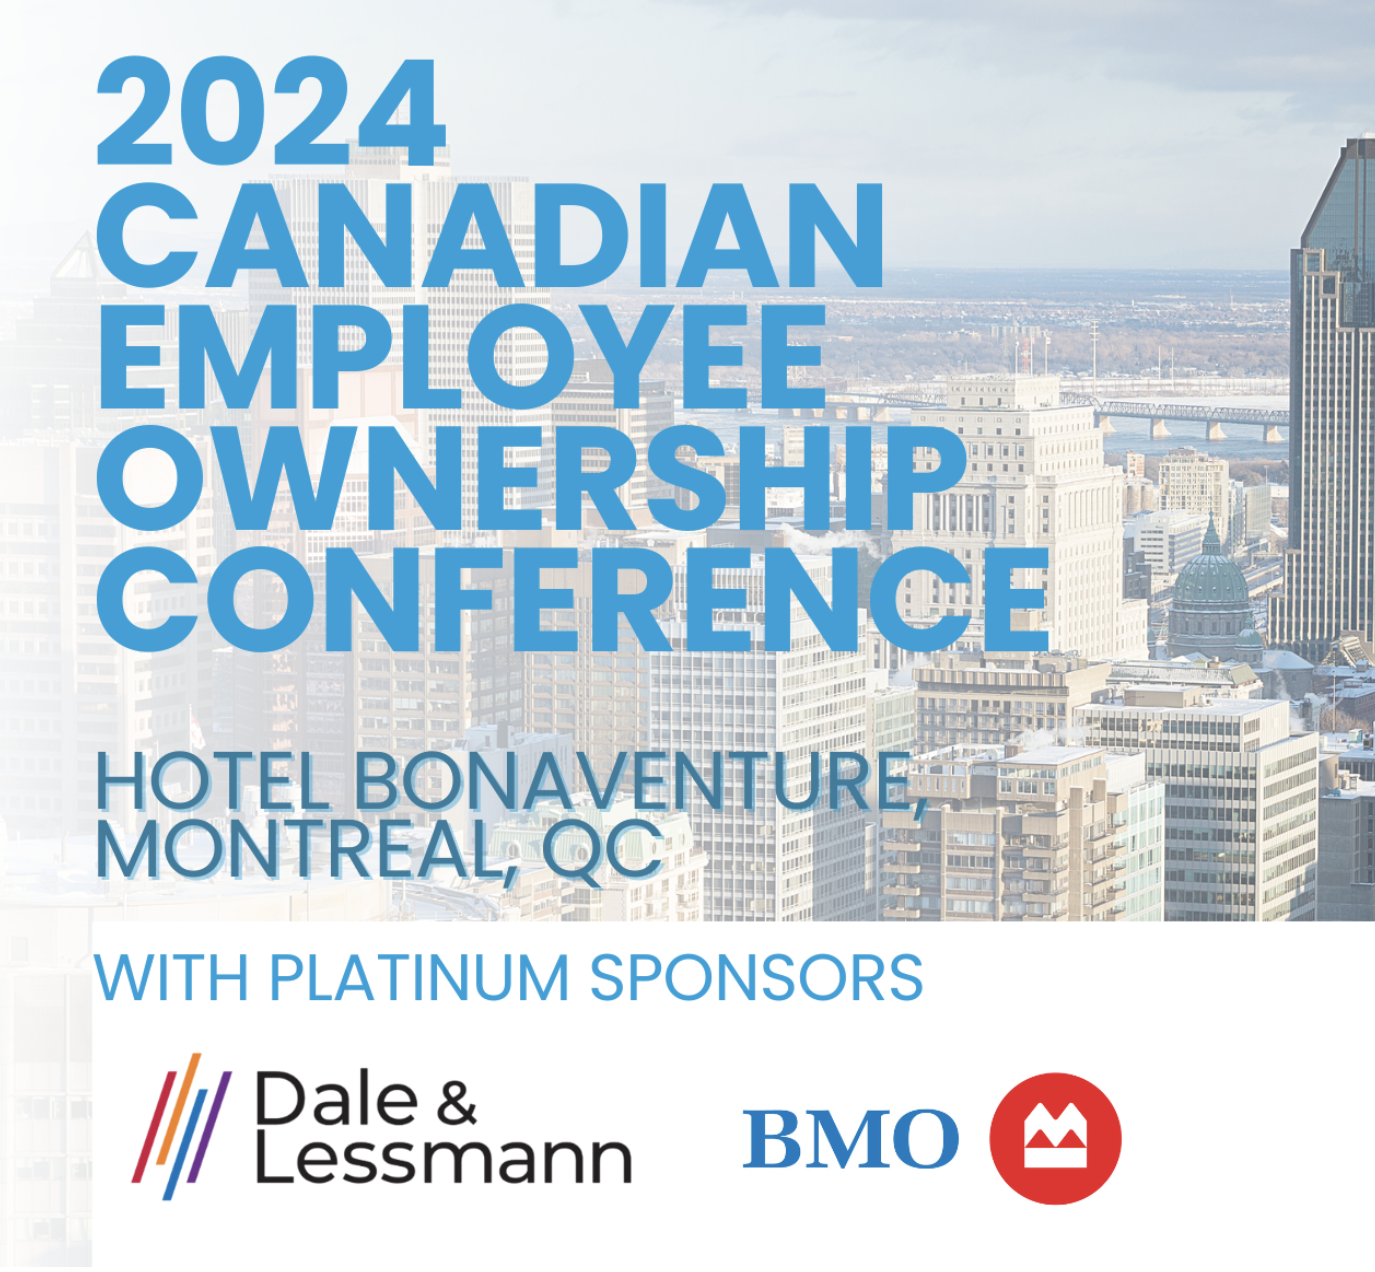 2024 Canadian Employee Ownership Conference